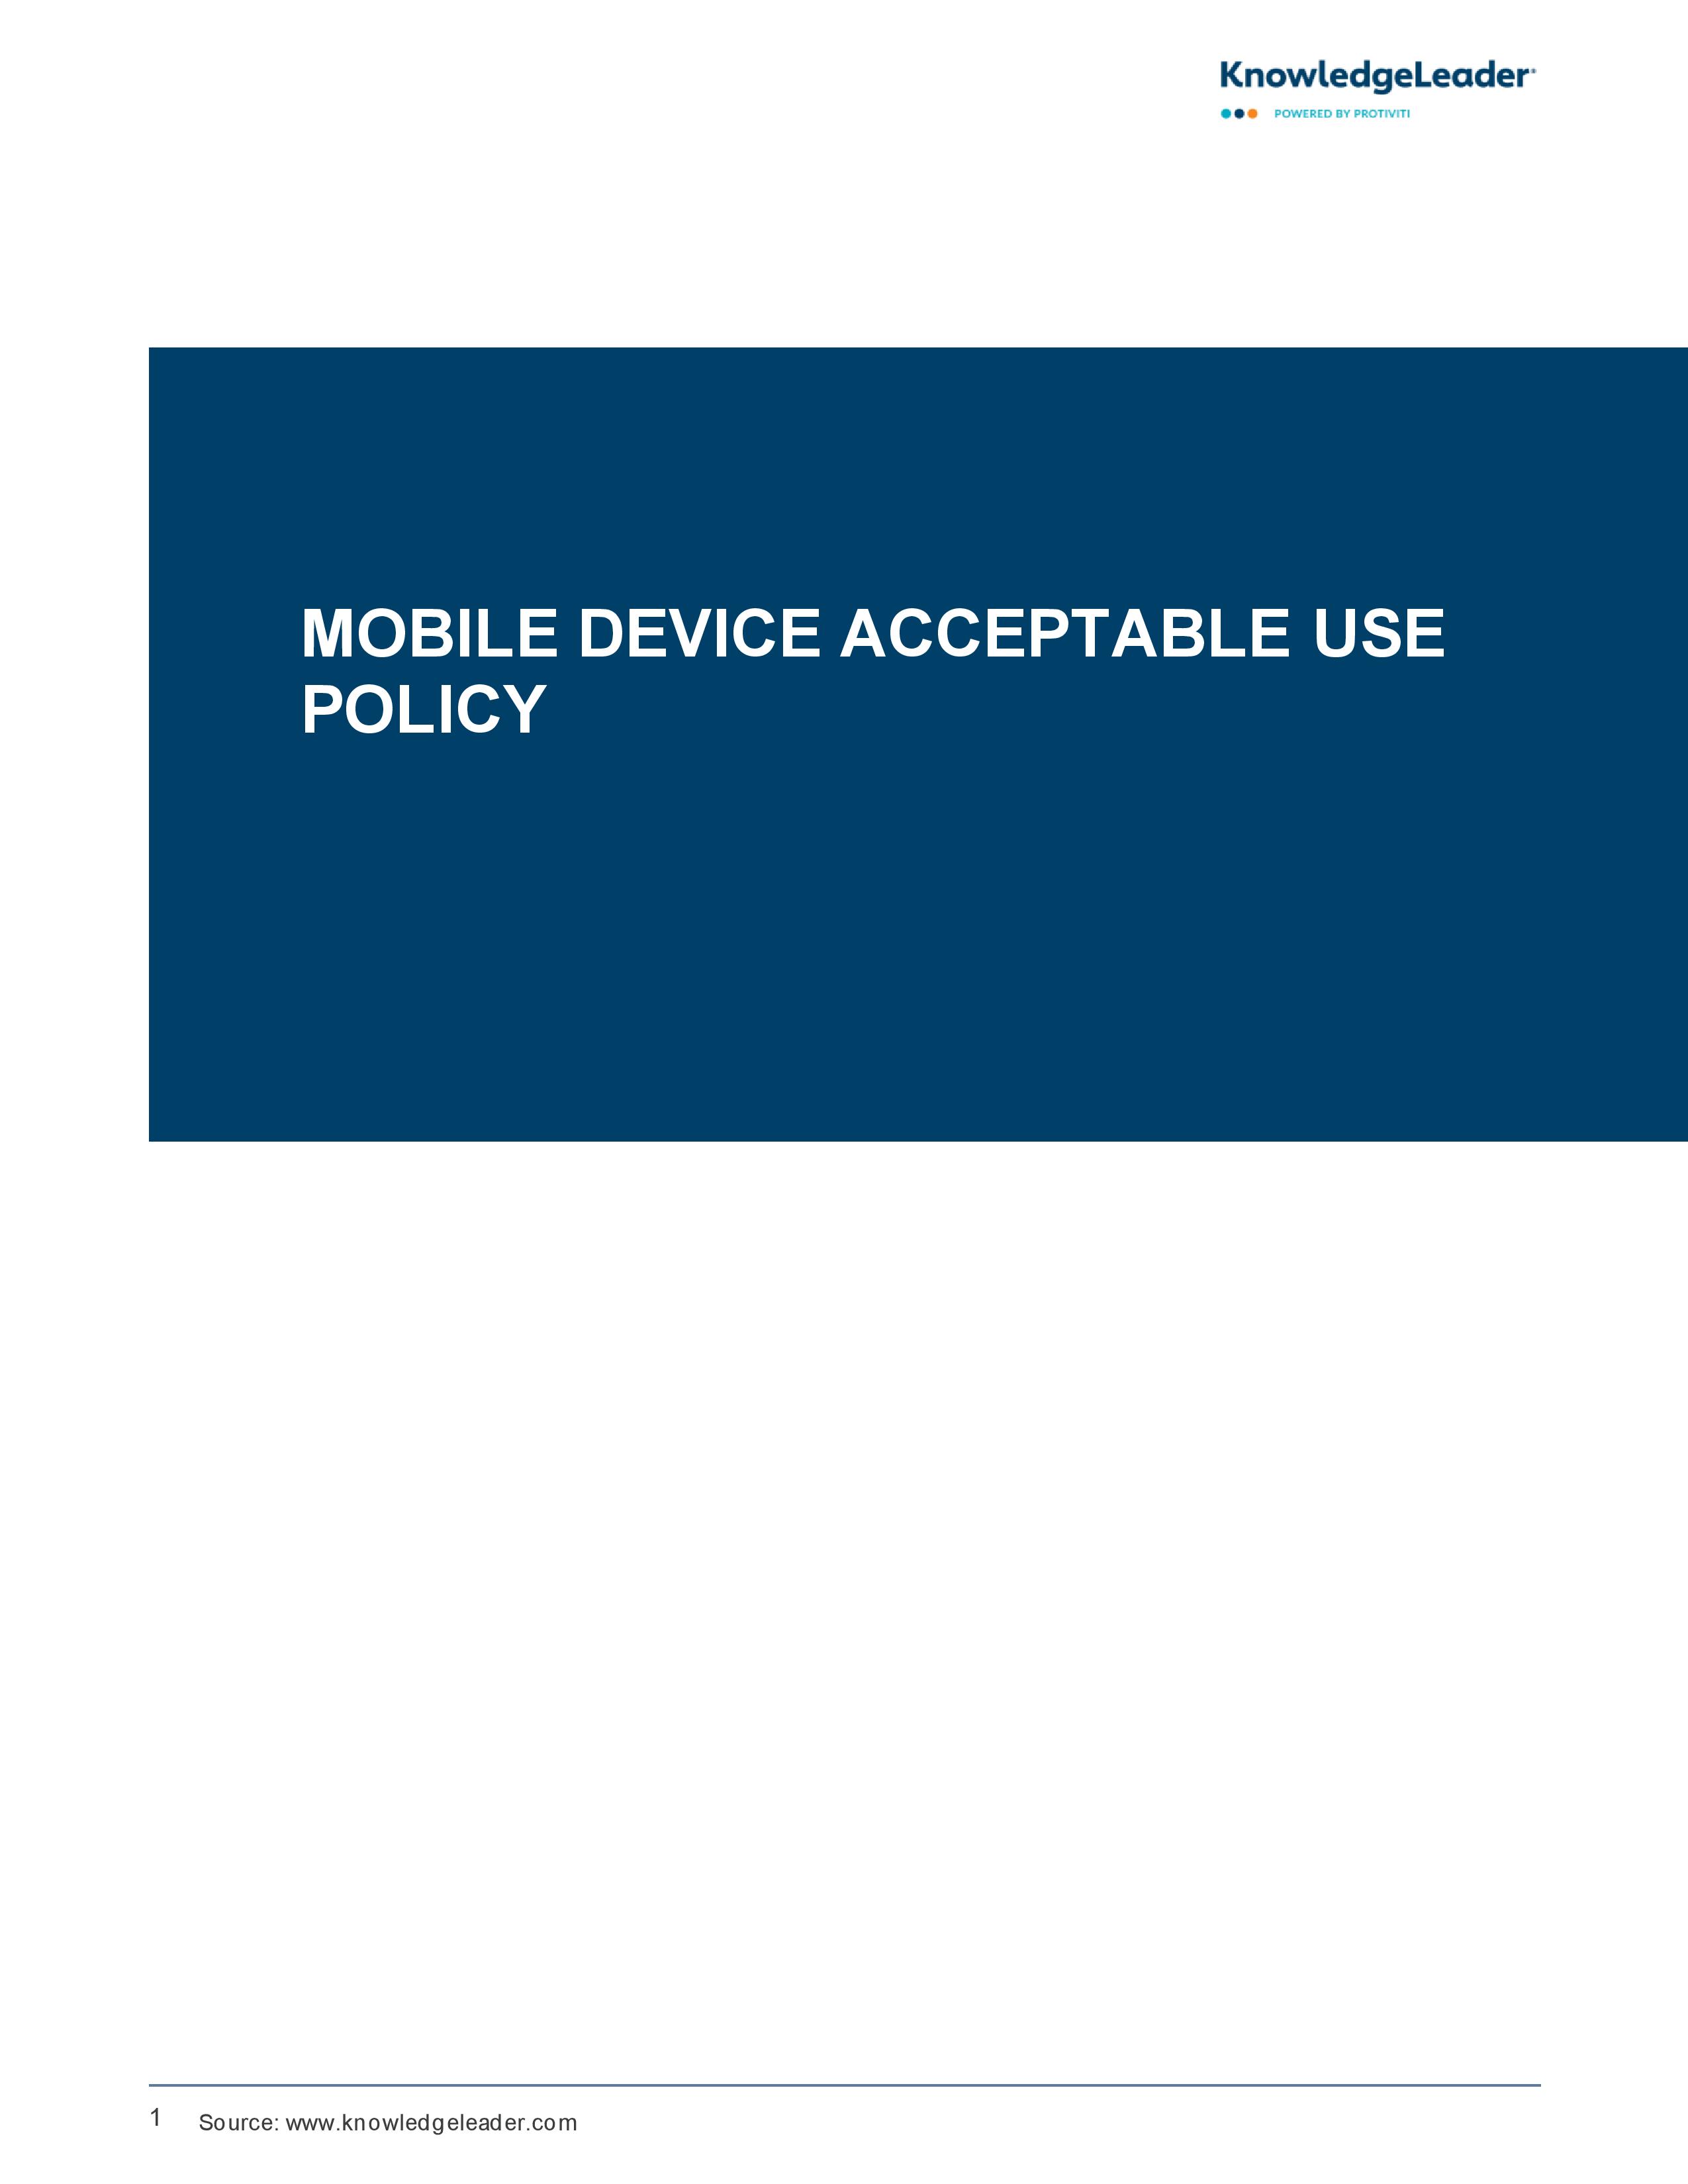 Screenshot of the first page of Mobile Device Acceptable Use Policy 